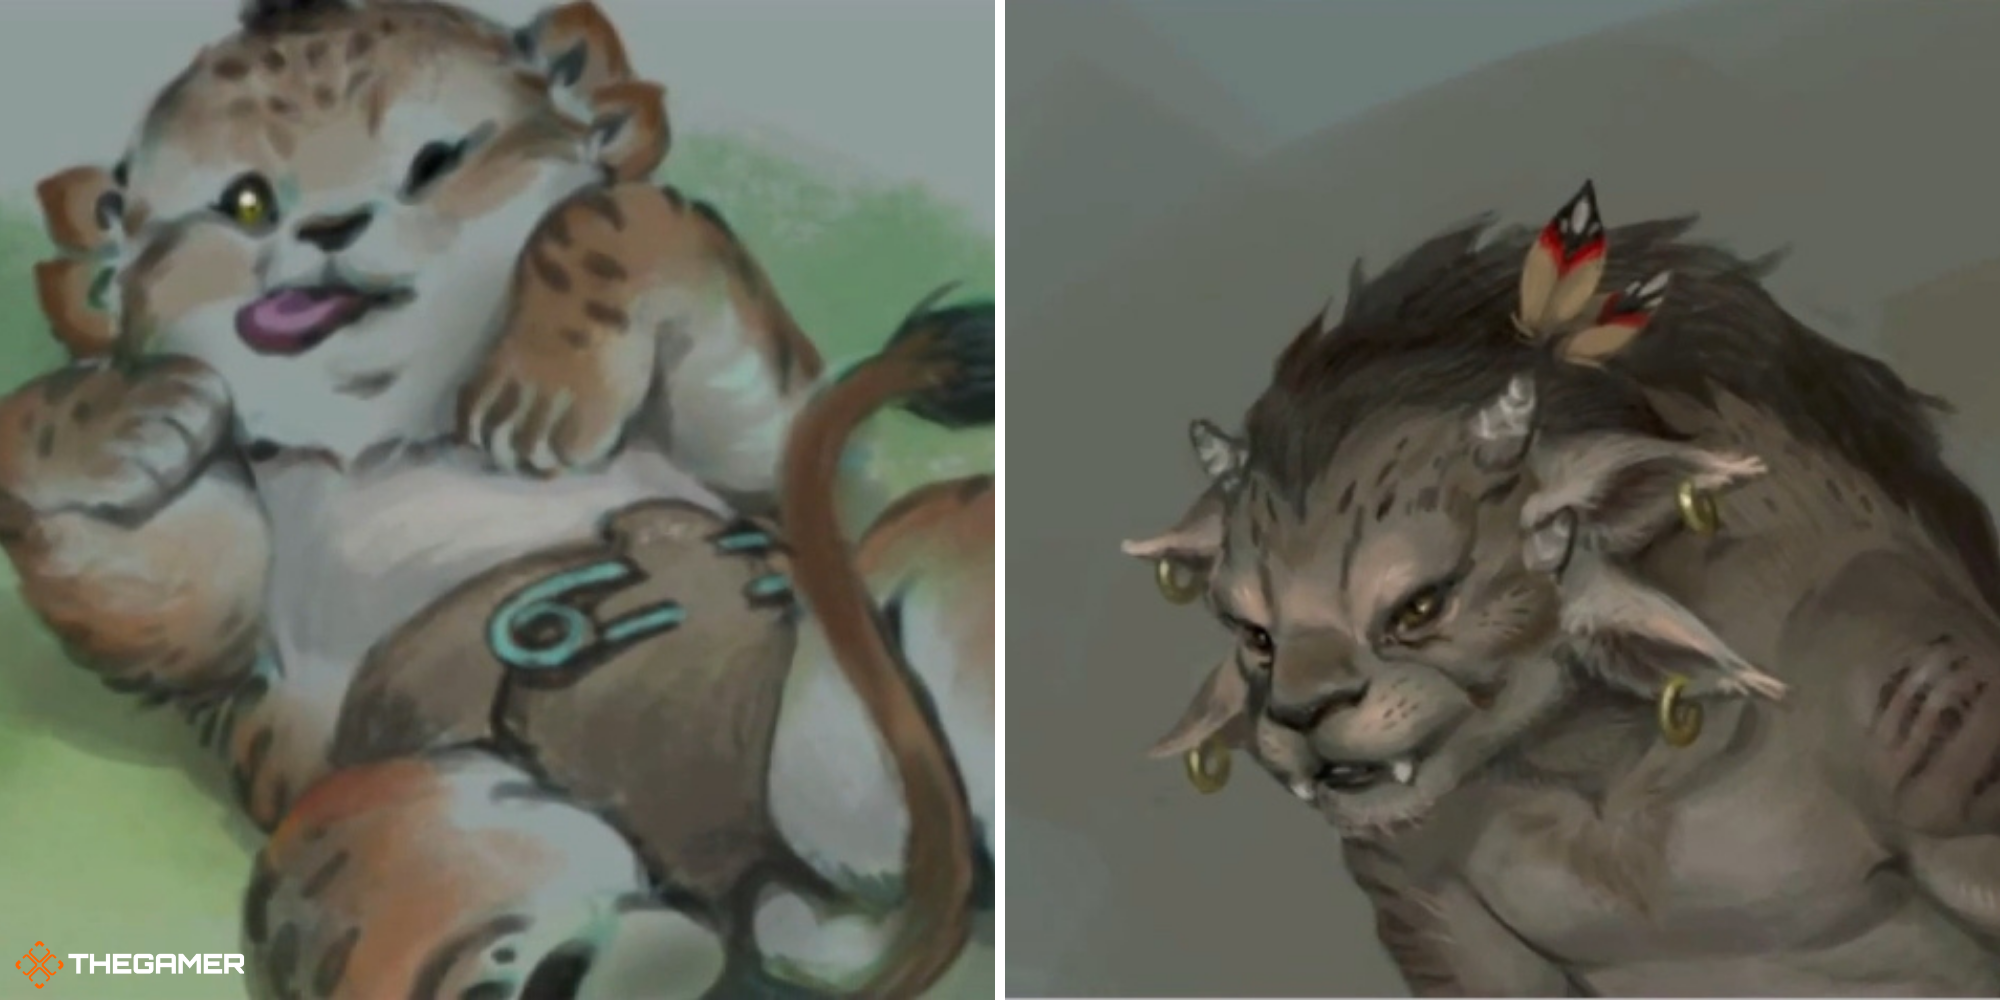 Guild Wars 2 - Concept art of young charr